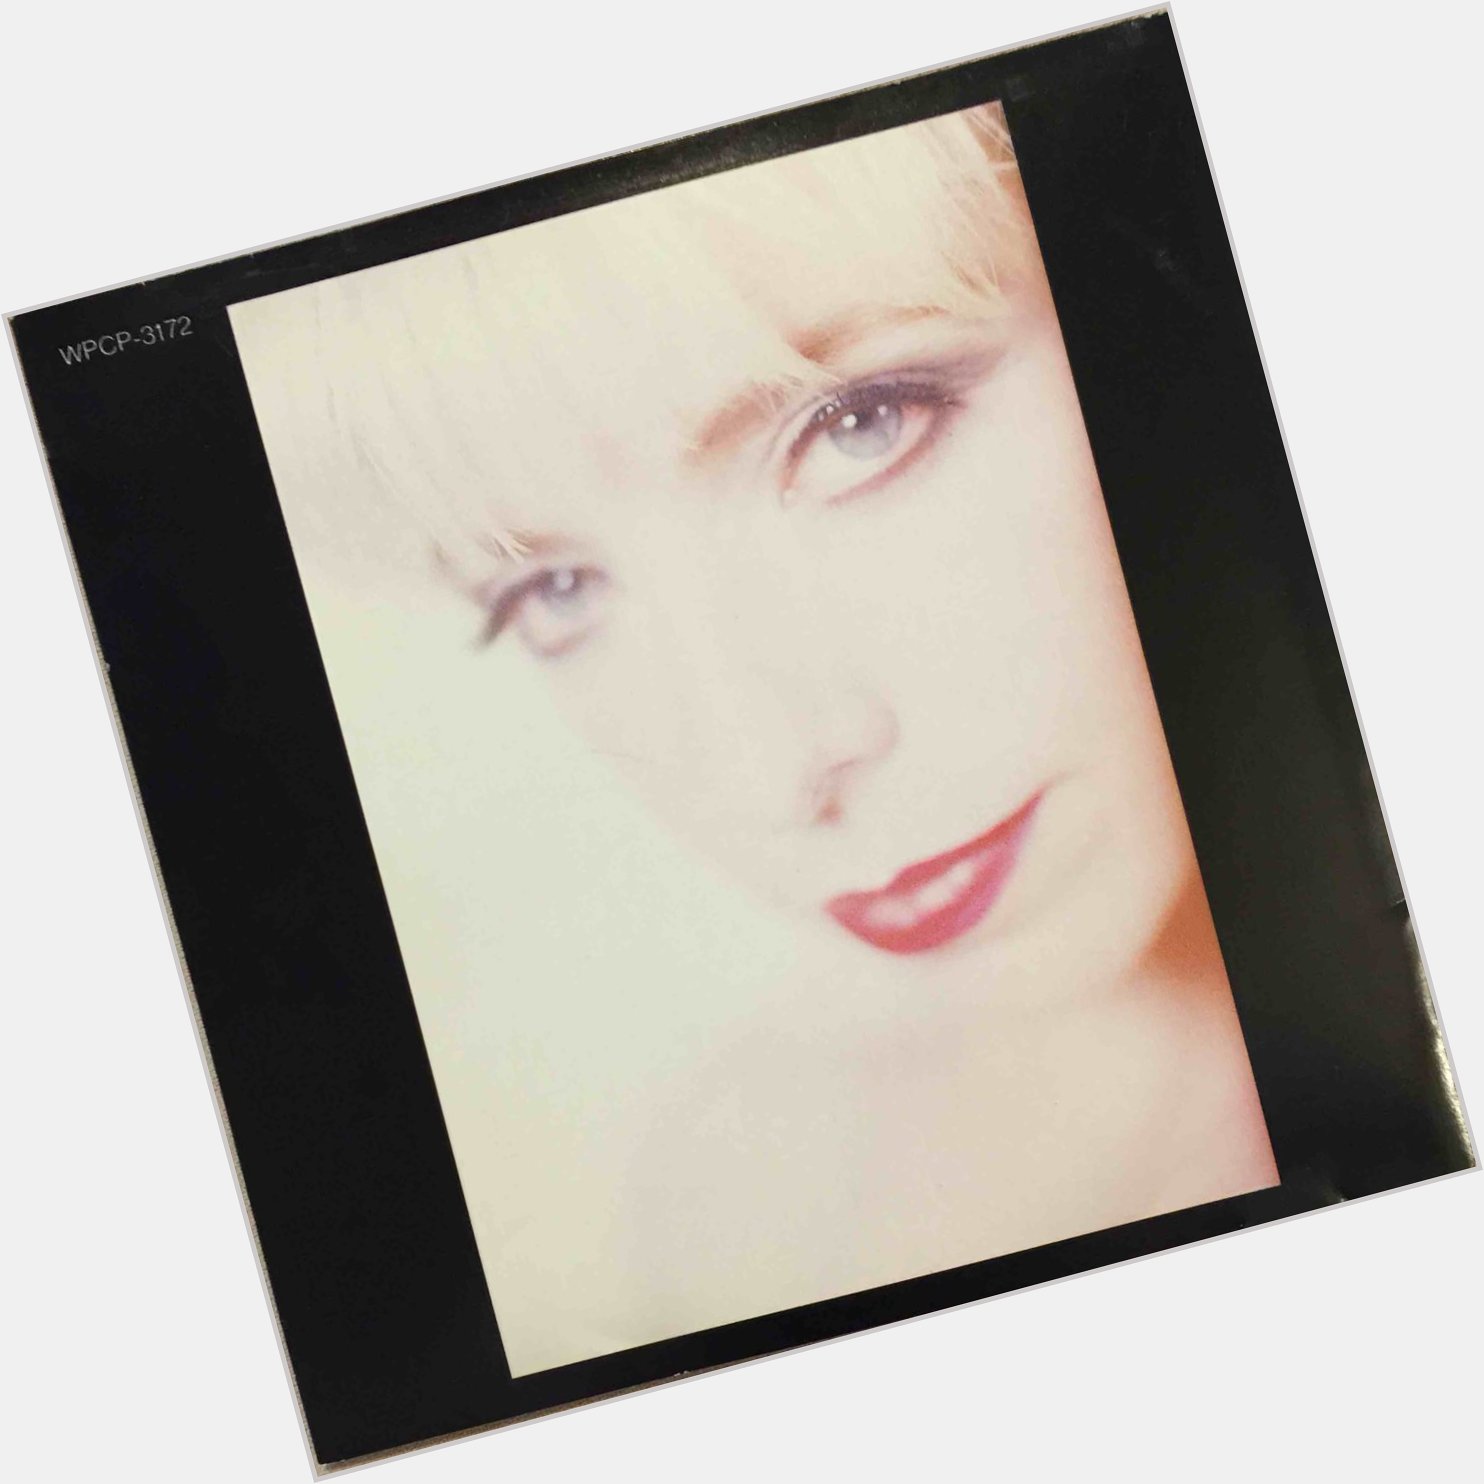      Happy Birthday Julee Cruise! We\re still floating with you...
12 1                   